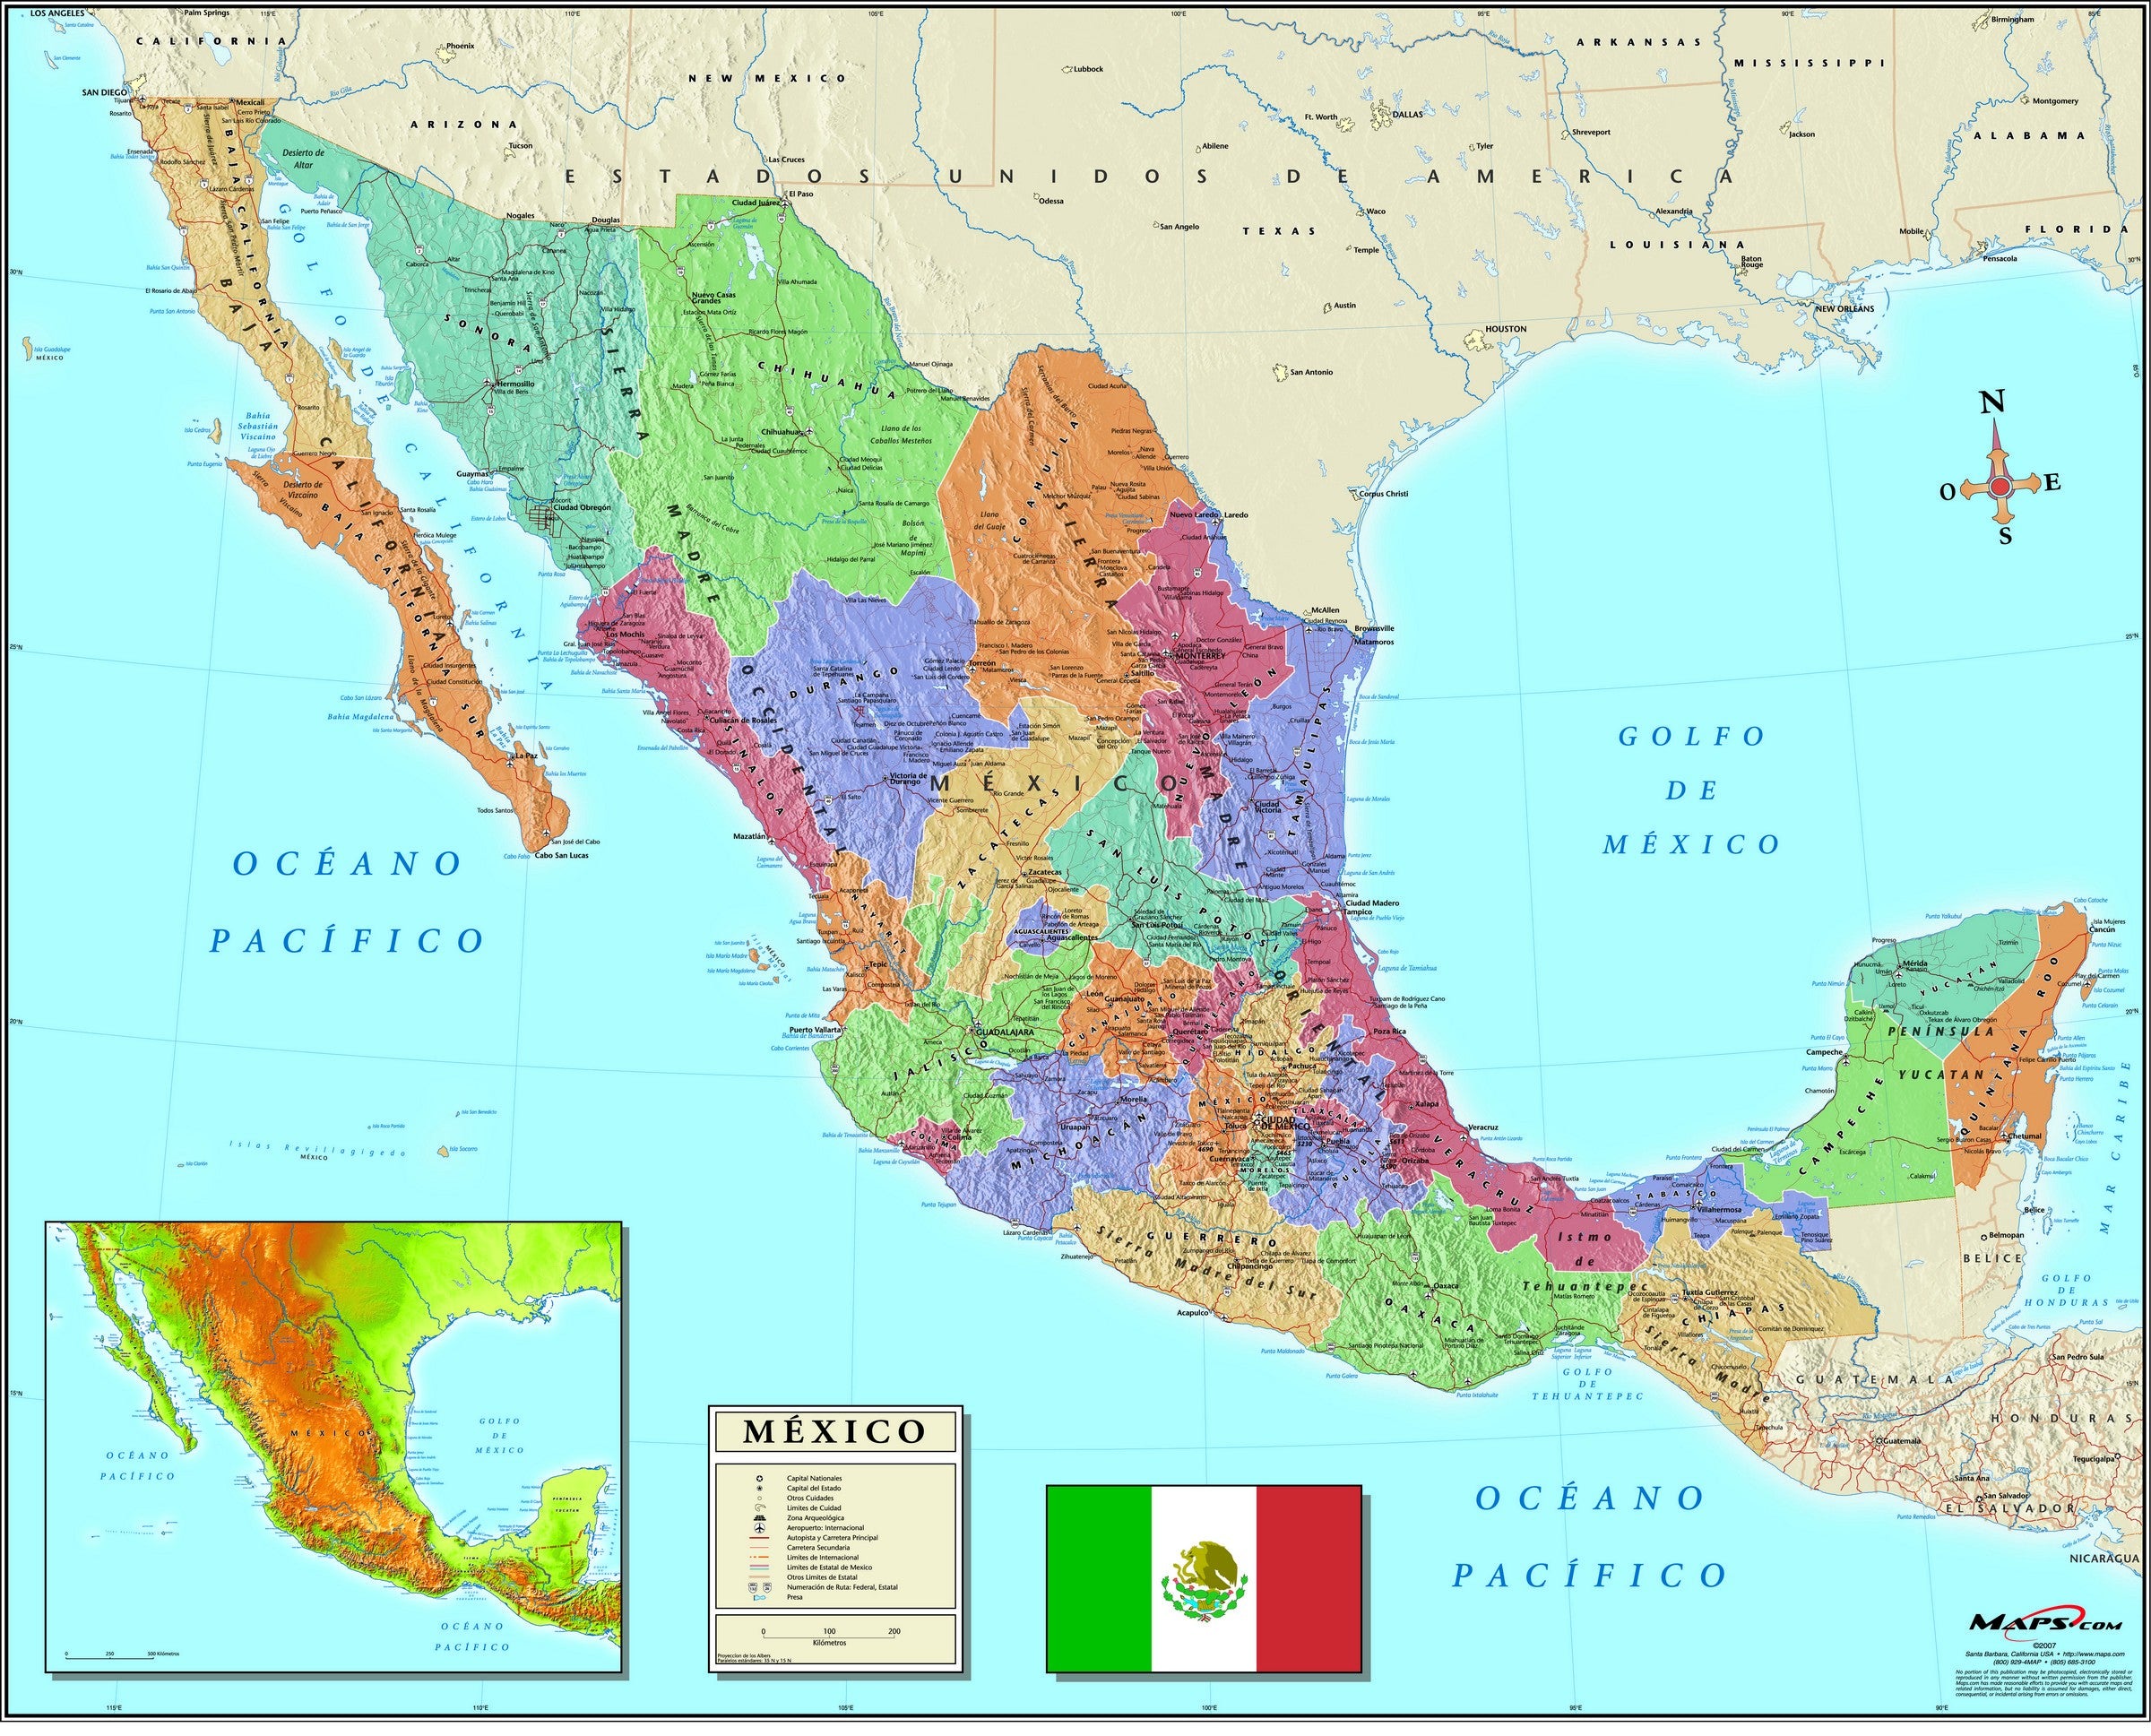 Mexico Wall Map In Spanish | Maps.com.com